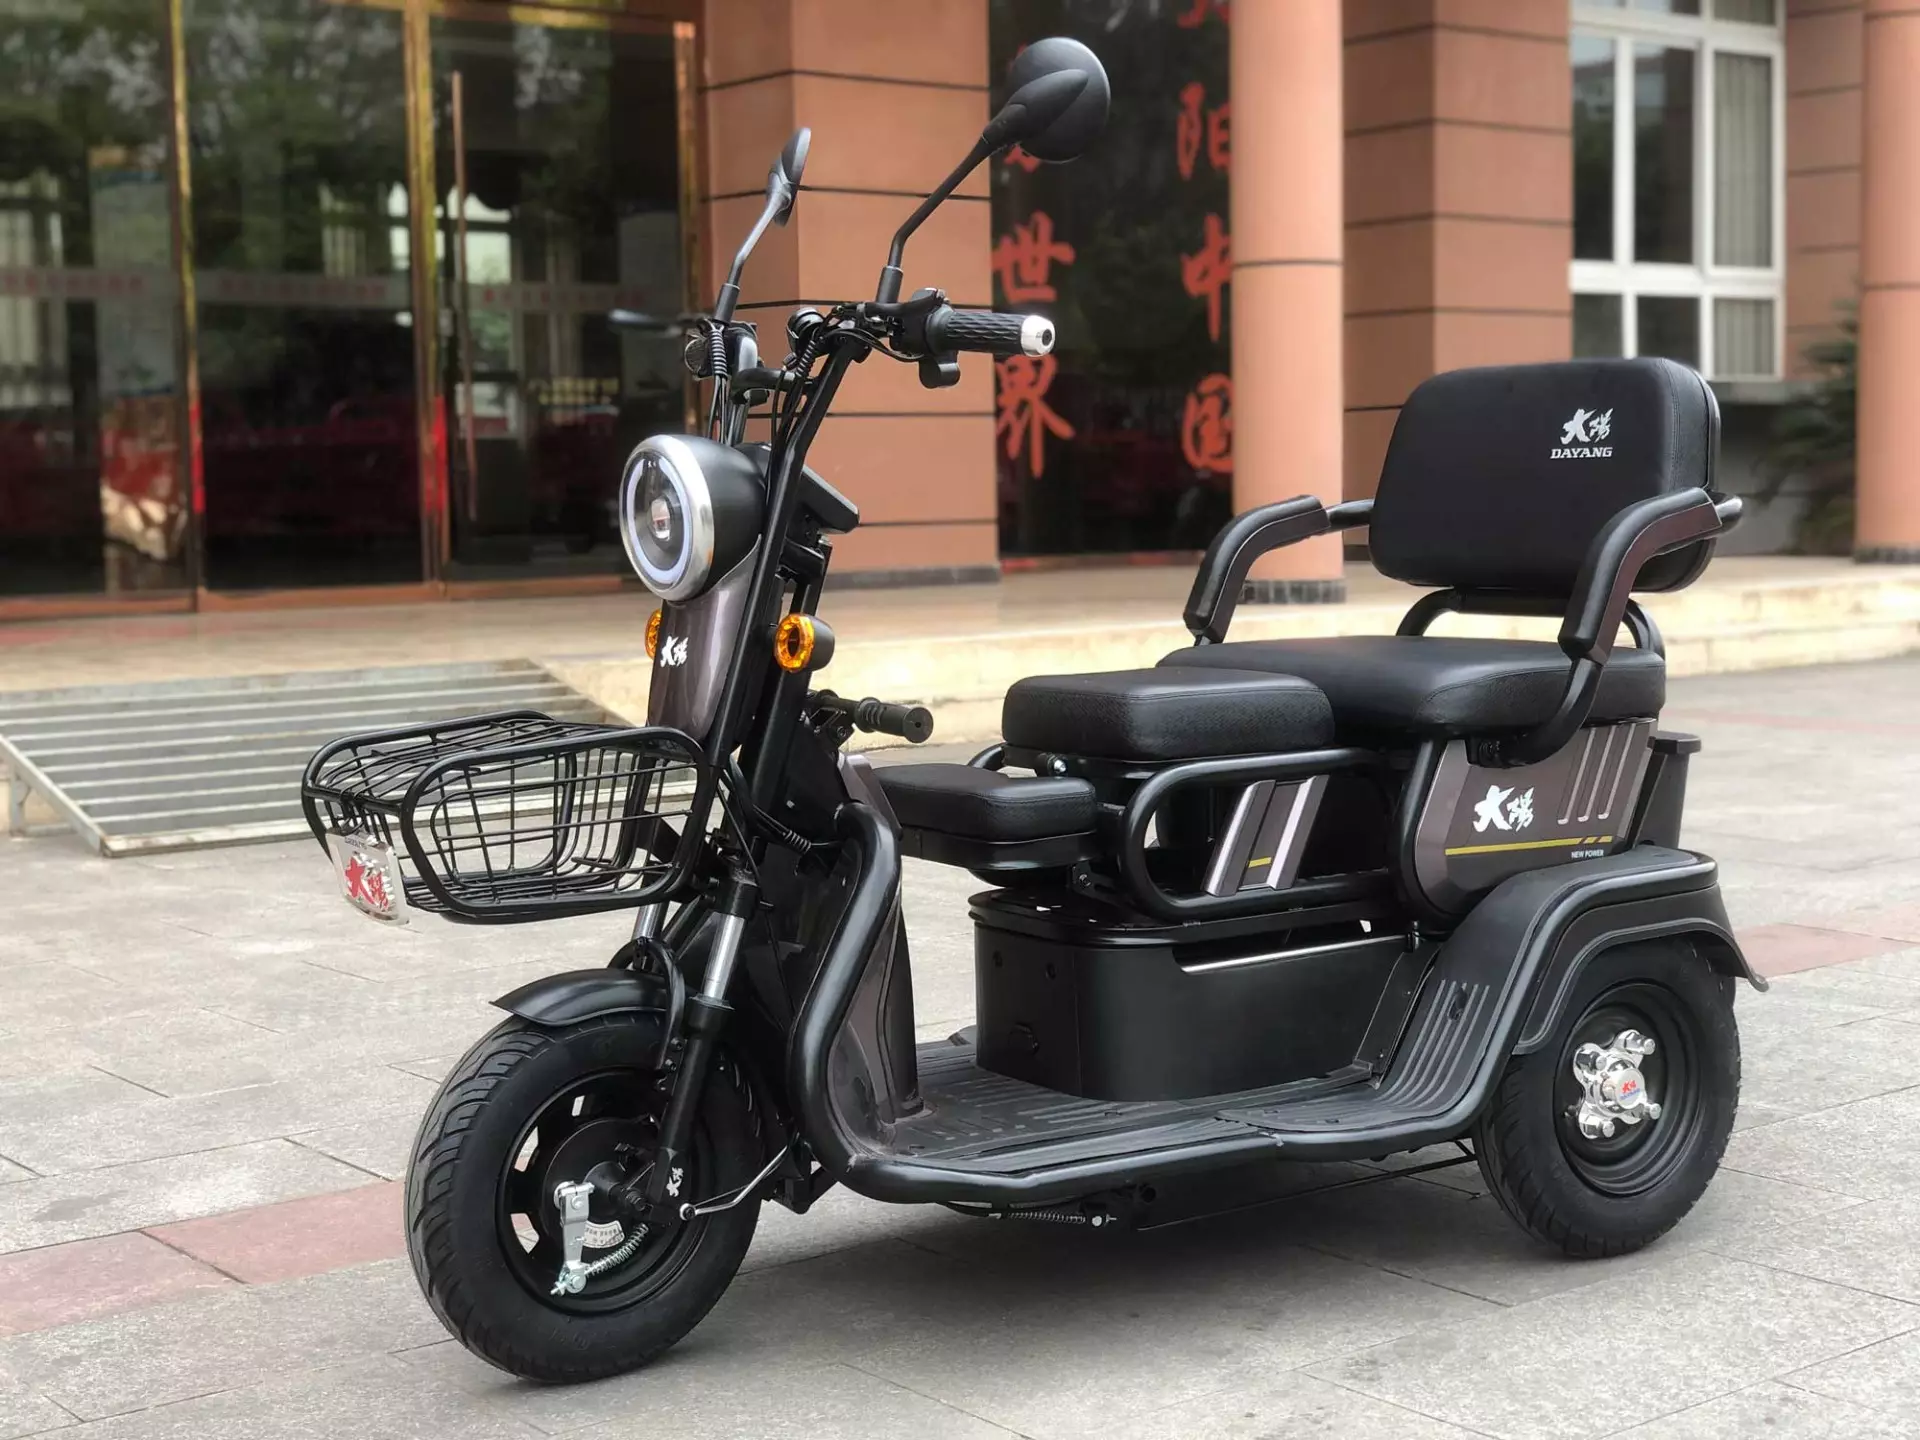 DAYANG China factory hot Sale electric 3 wheel tricycle Environmental motorcycle adult leisure tricycle with low price new style